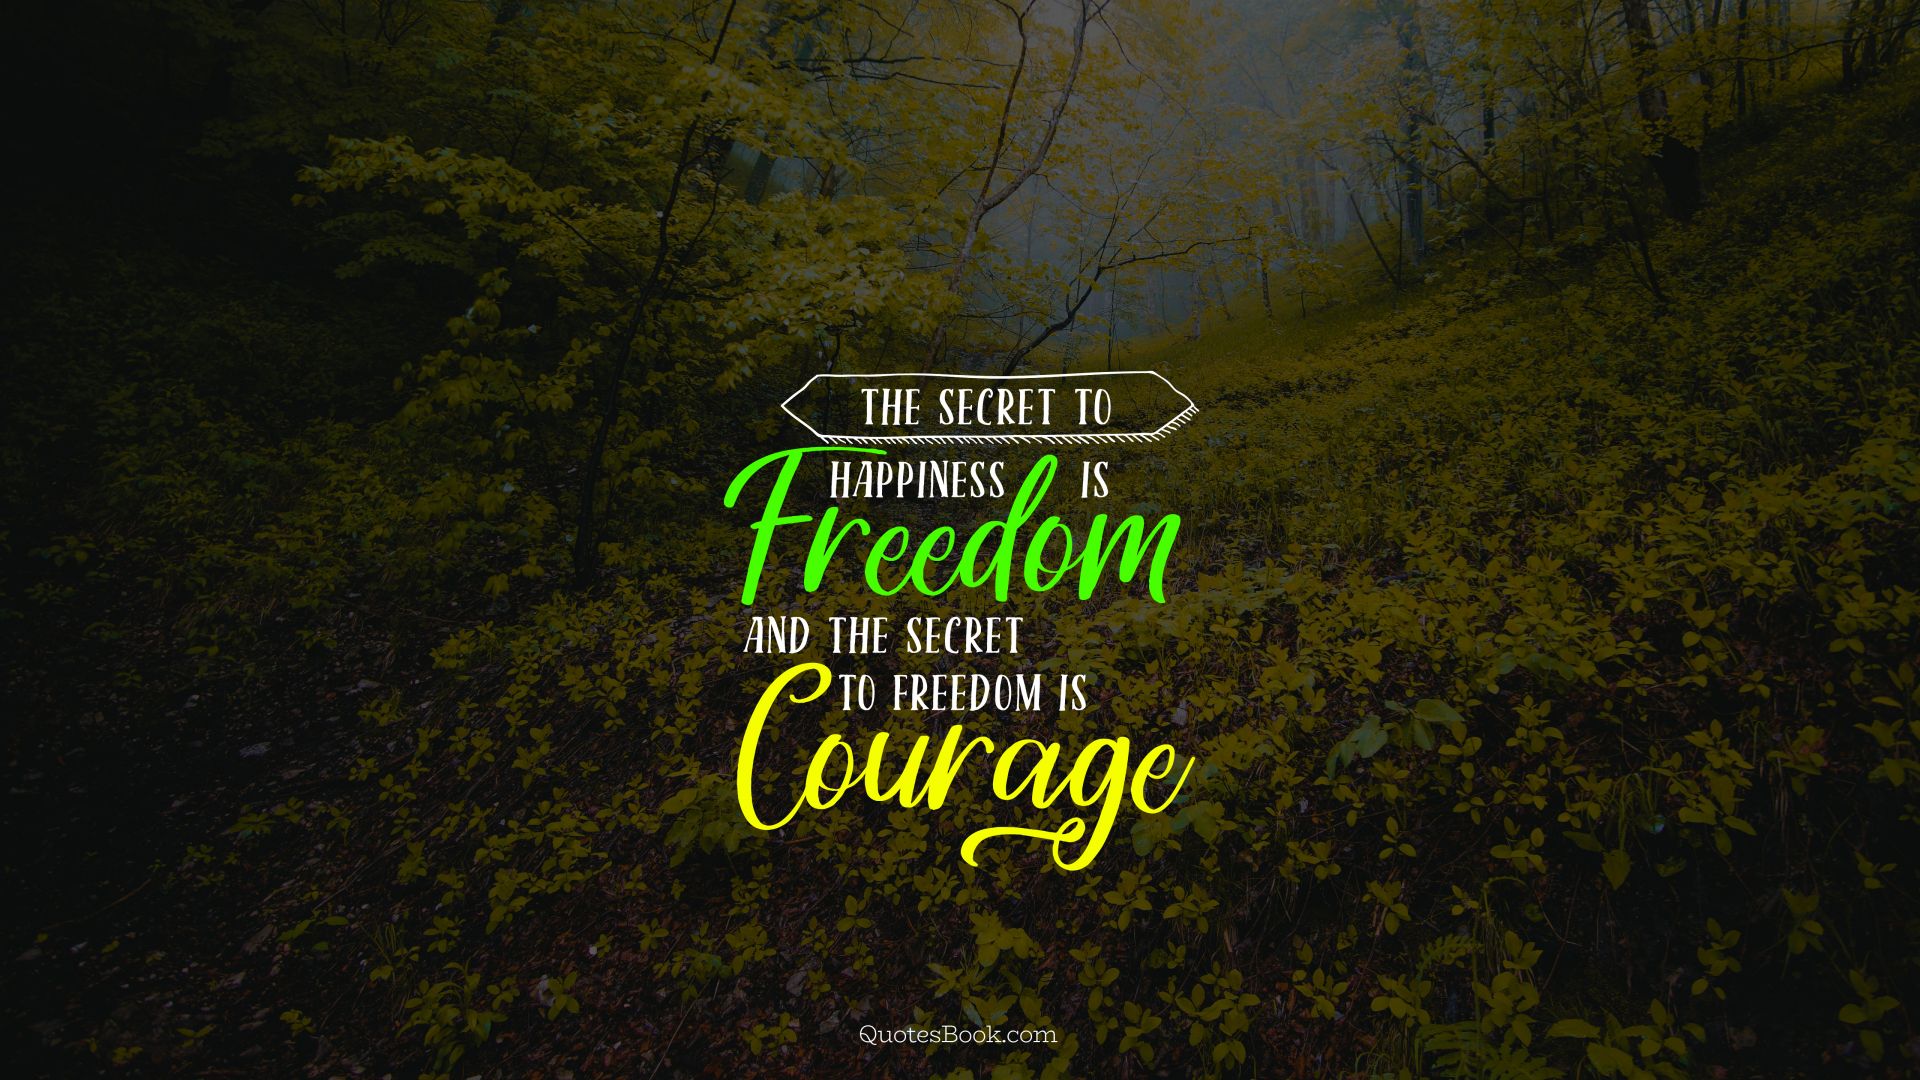 The secret to happiness is freedom and the secret to freedom is courage